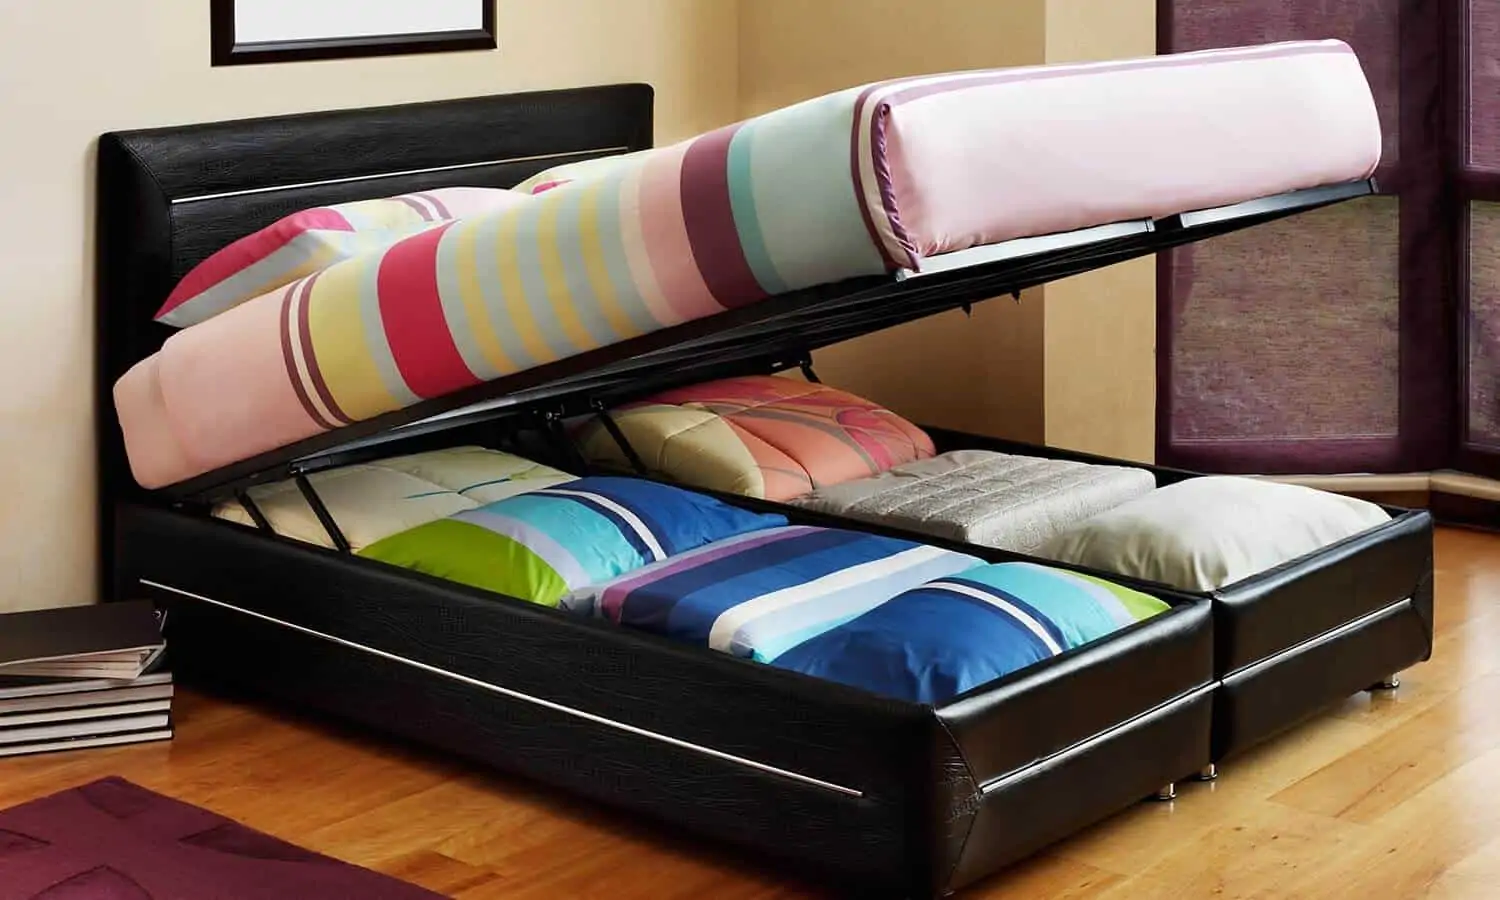  ottoman bed, storage bed with box, hydraulic bed, space saving bed like futon